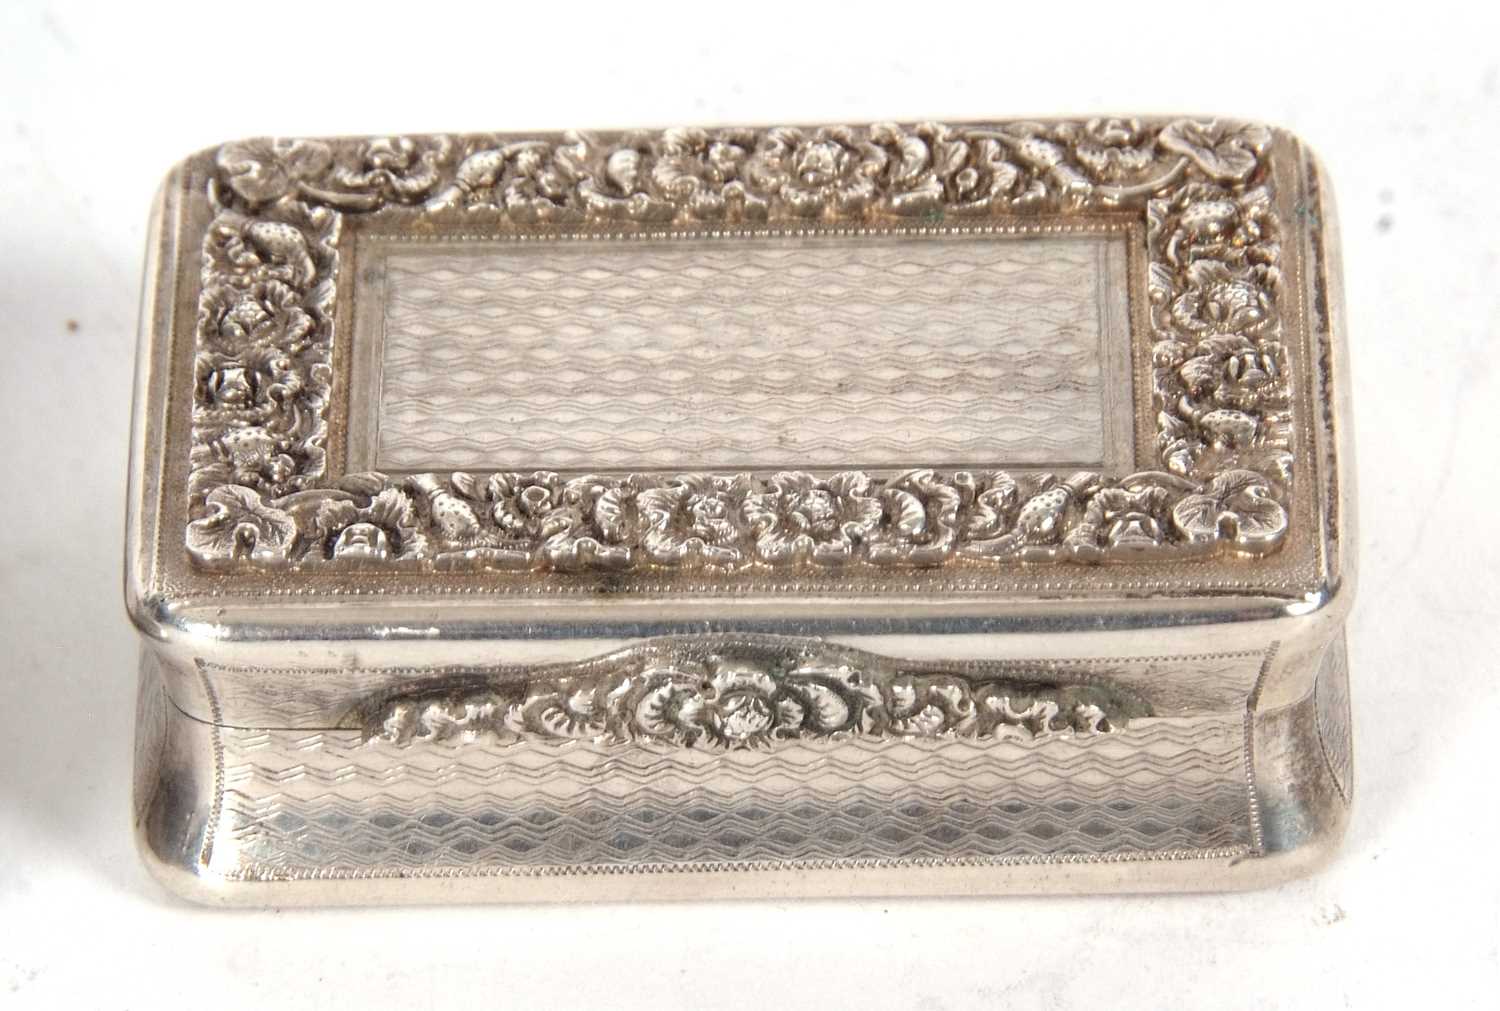 Mixed Lot: Antique snuff box of rectangular form with hinged lid with a raised floral border and - Image 4 of 5